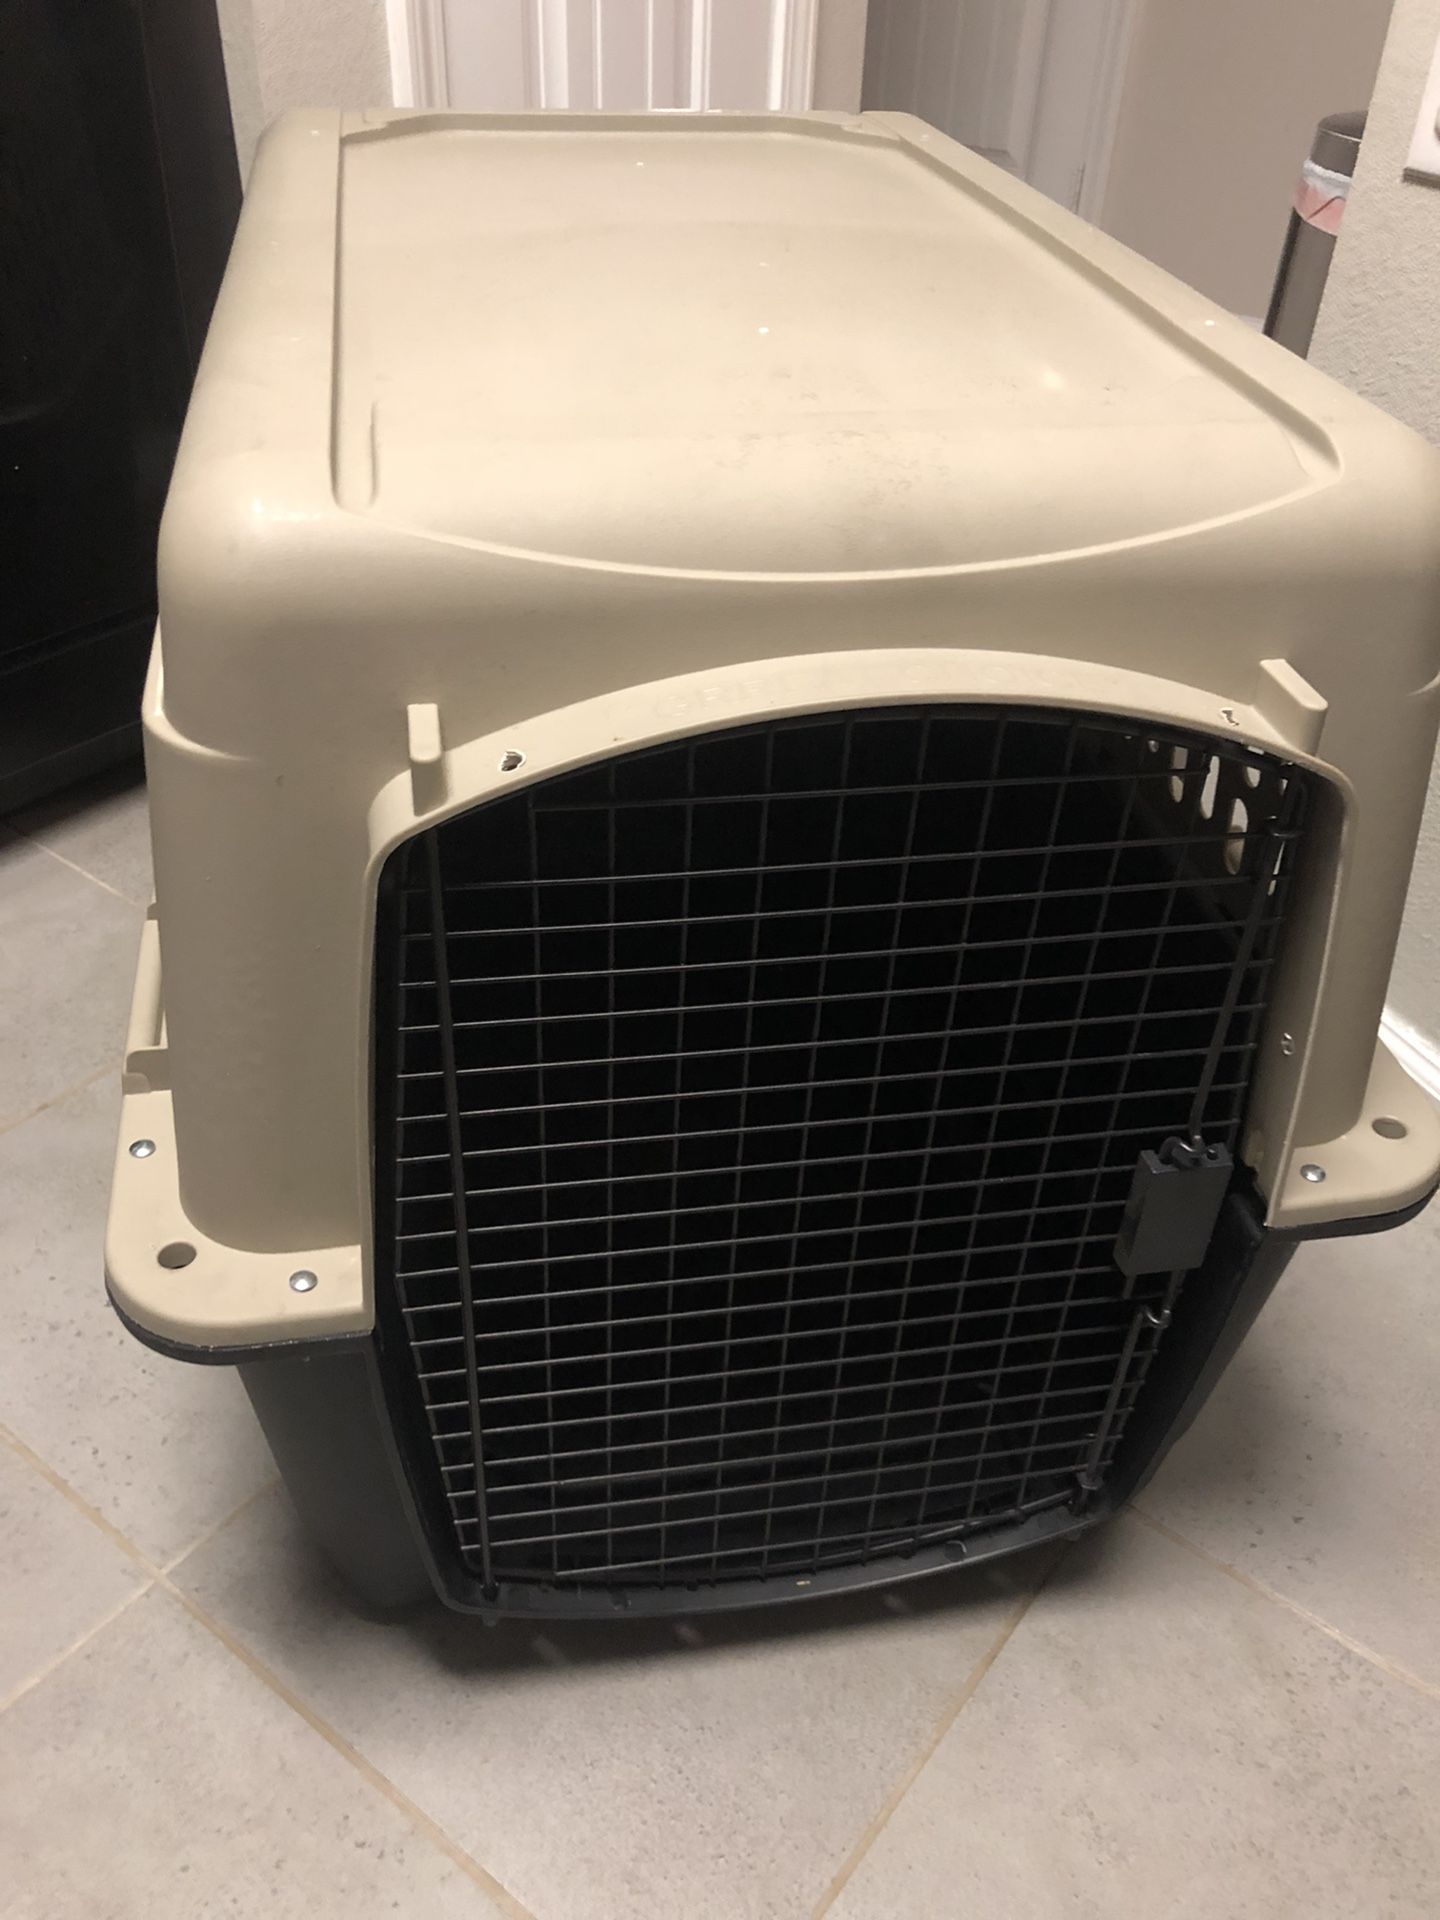 Dog Travel Crate